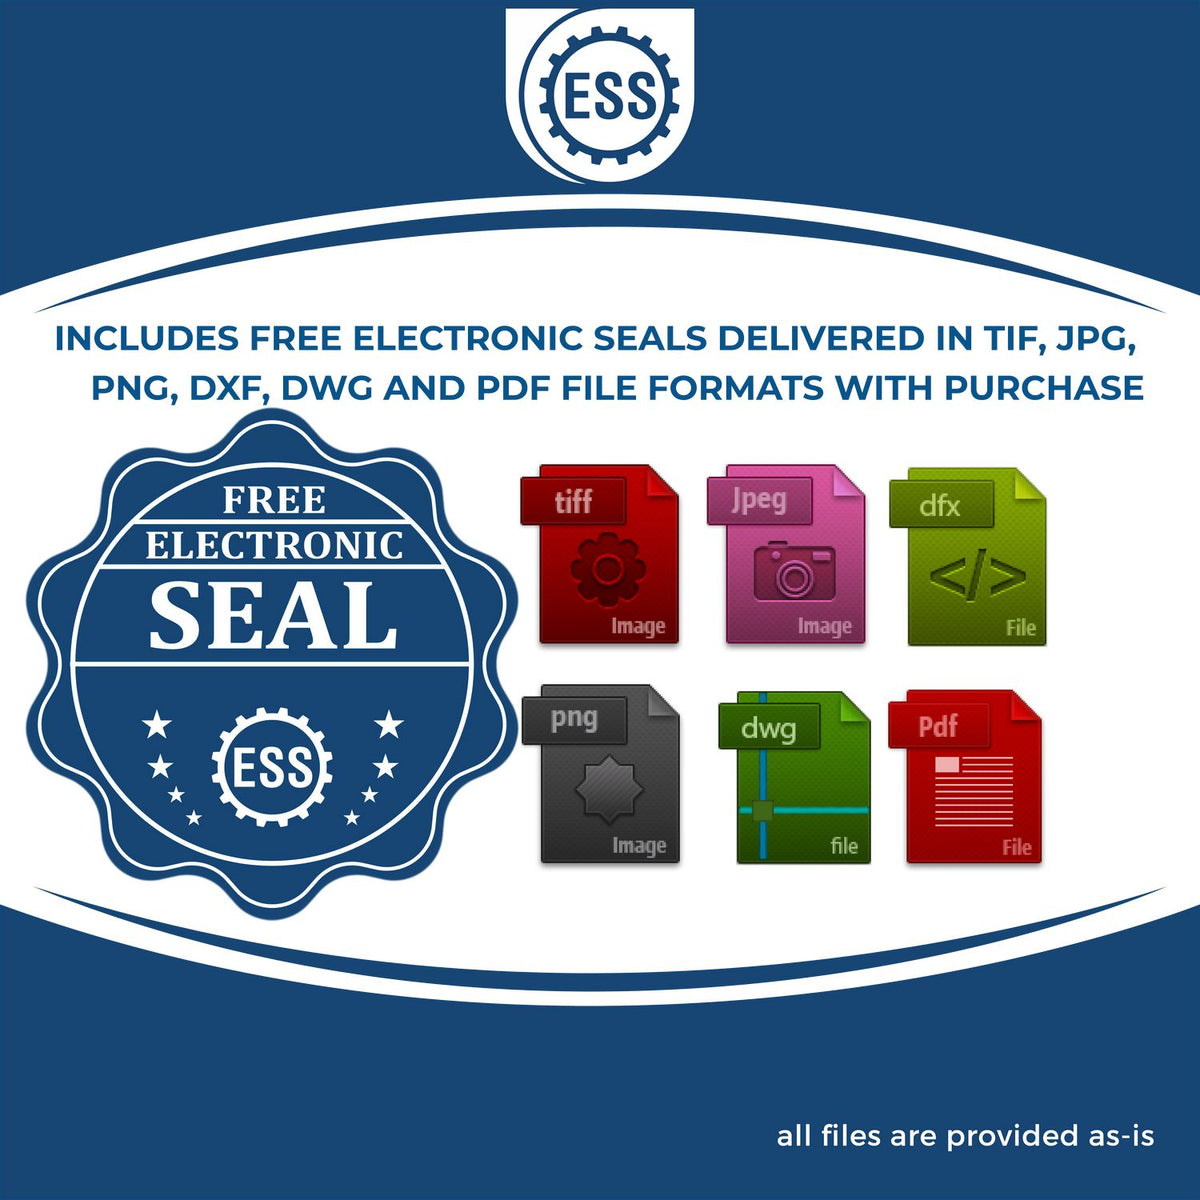 An infographic for the free electronic seal for the Connecticut Professional Geologist Seal Stamp illustrating the different file type icons such as DXF, DWG, TIF, JPG and PNG.